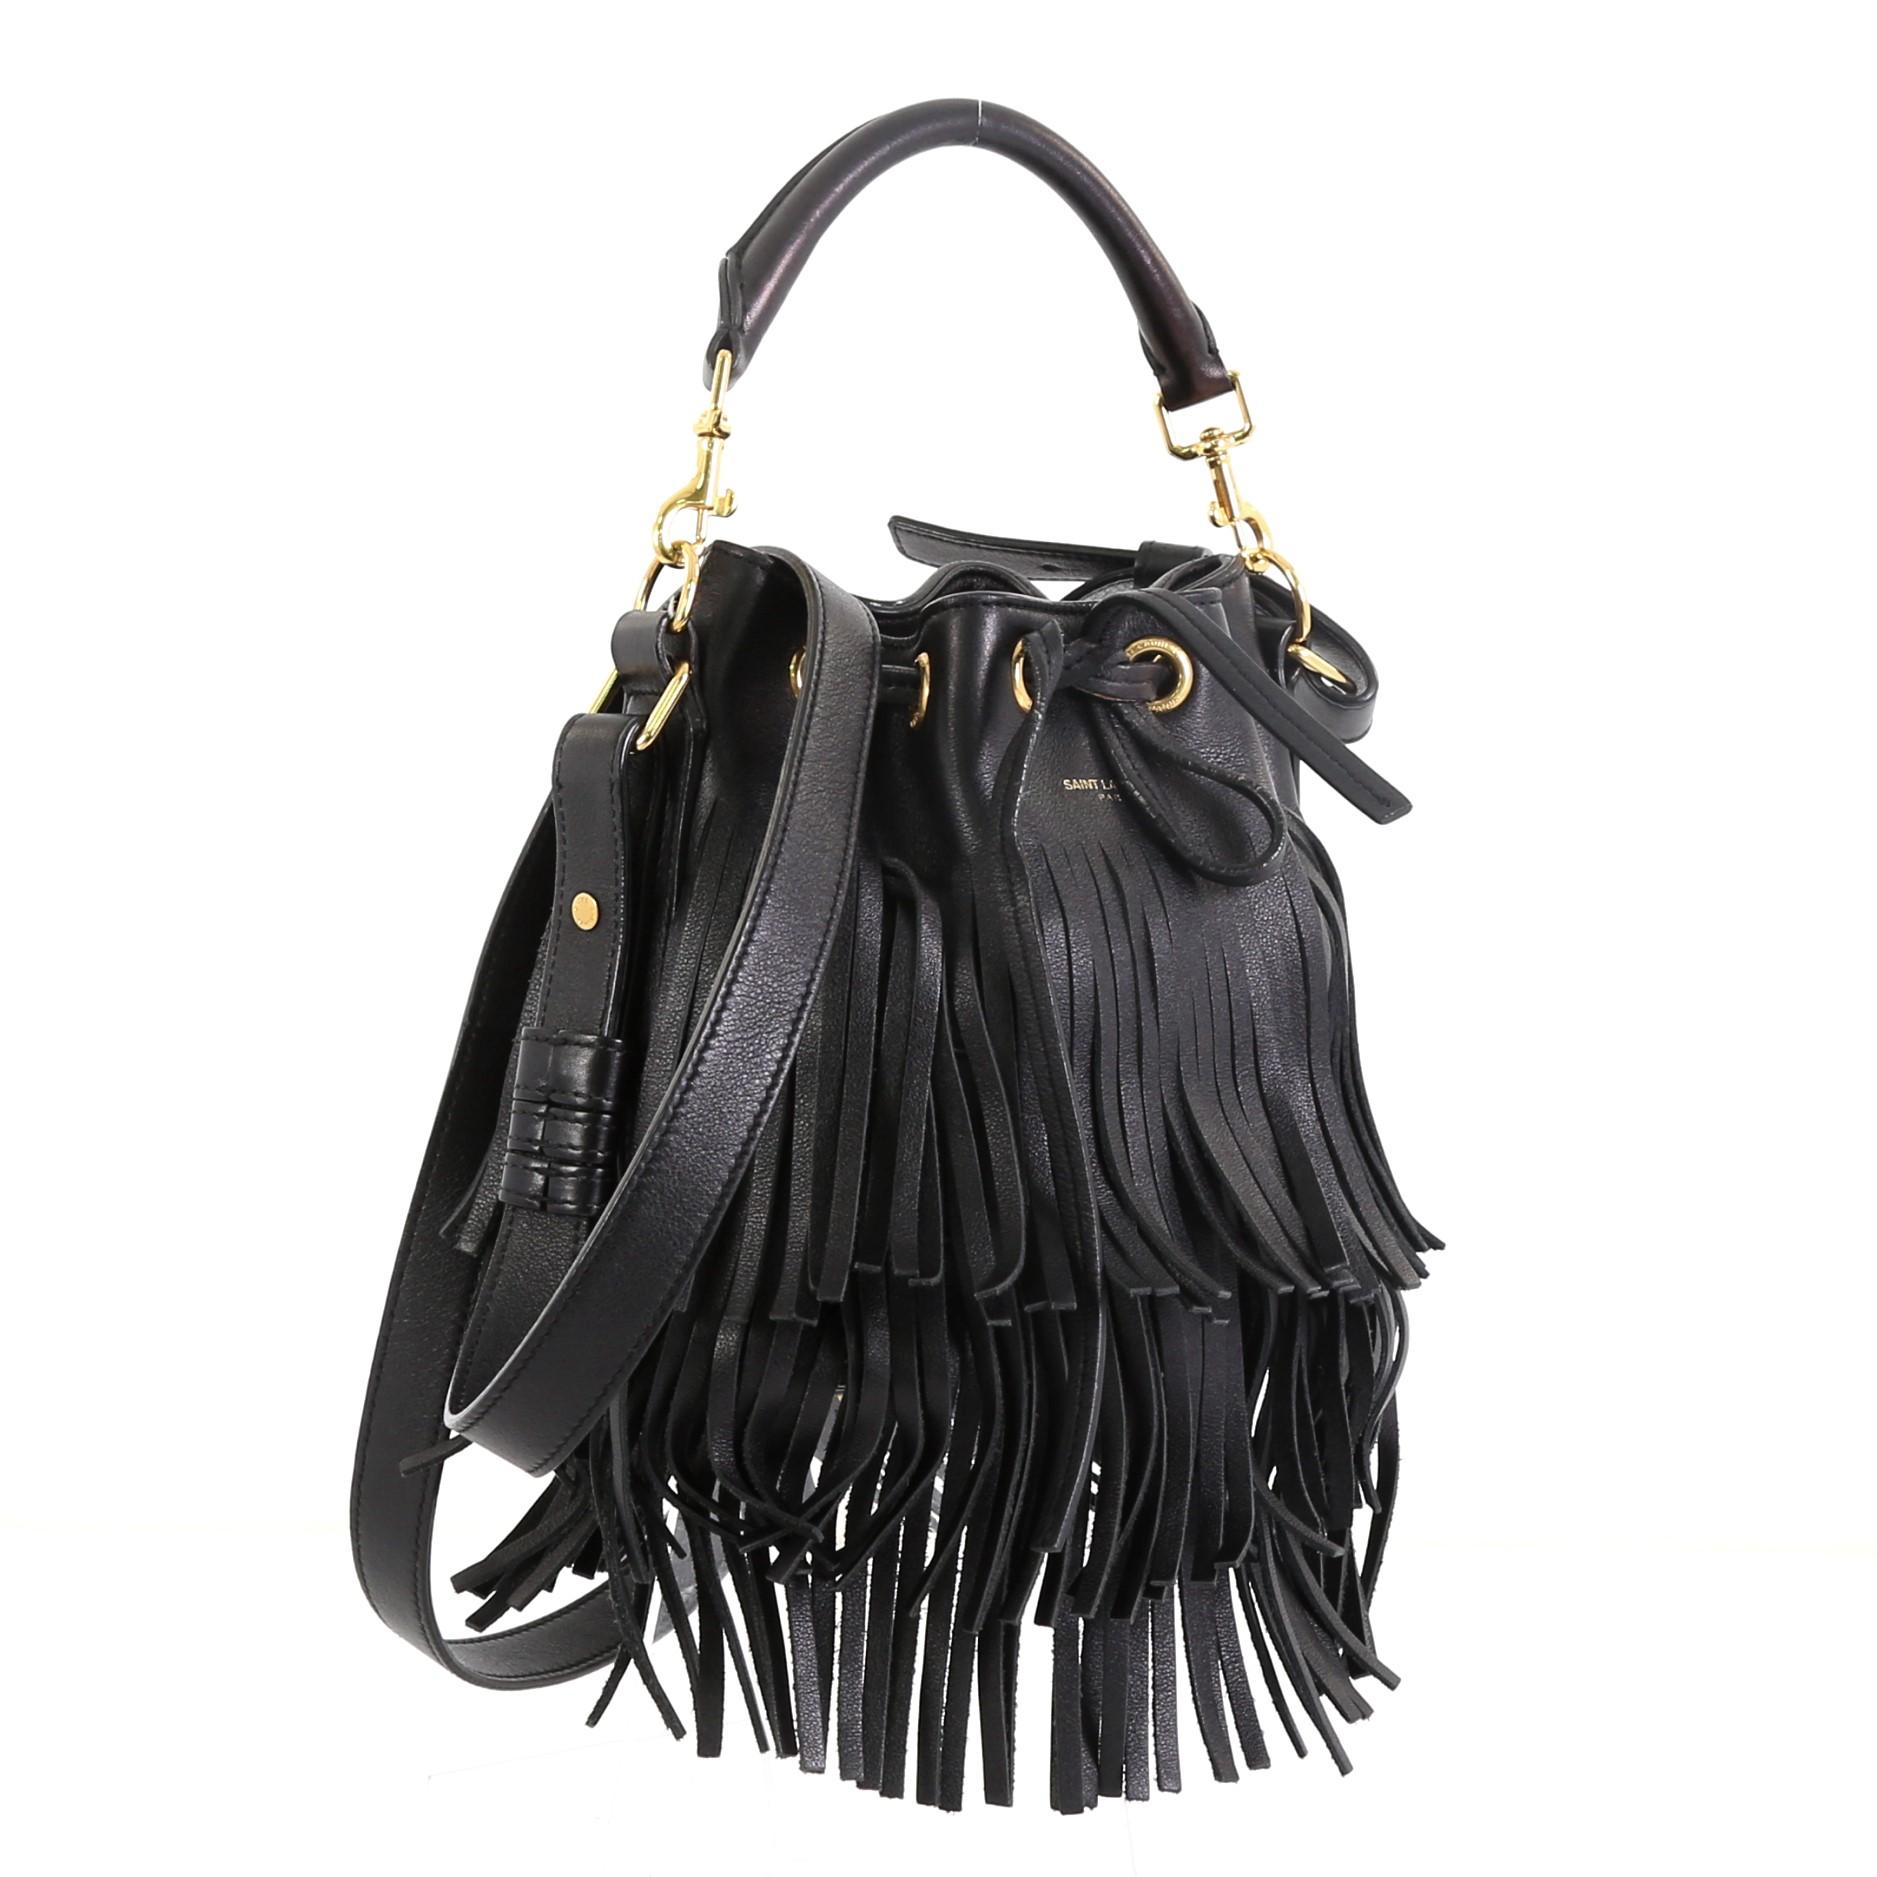 This Saint Laurent Fringe Emmanuelle Bucket Bag Leather Small, crafted in black leather, features a detachable looped handle, adjustable strap, cascading long fringes, side zip pockets, and gold-tone hardware. Its drawstring closure opens to a black